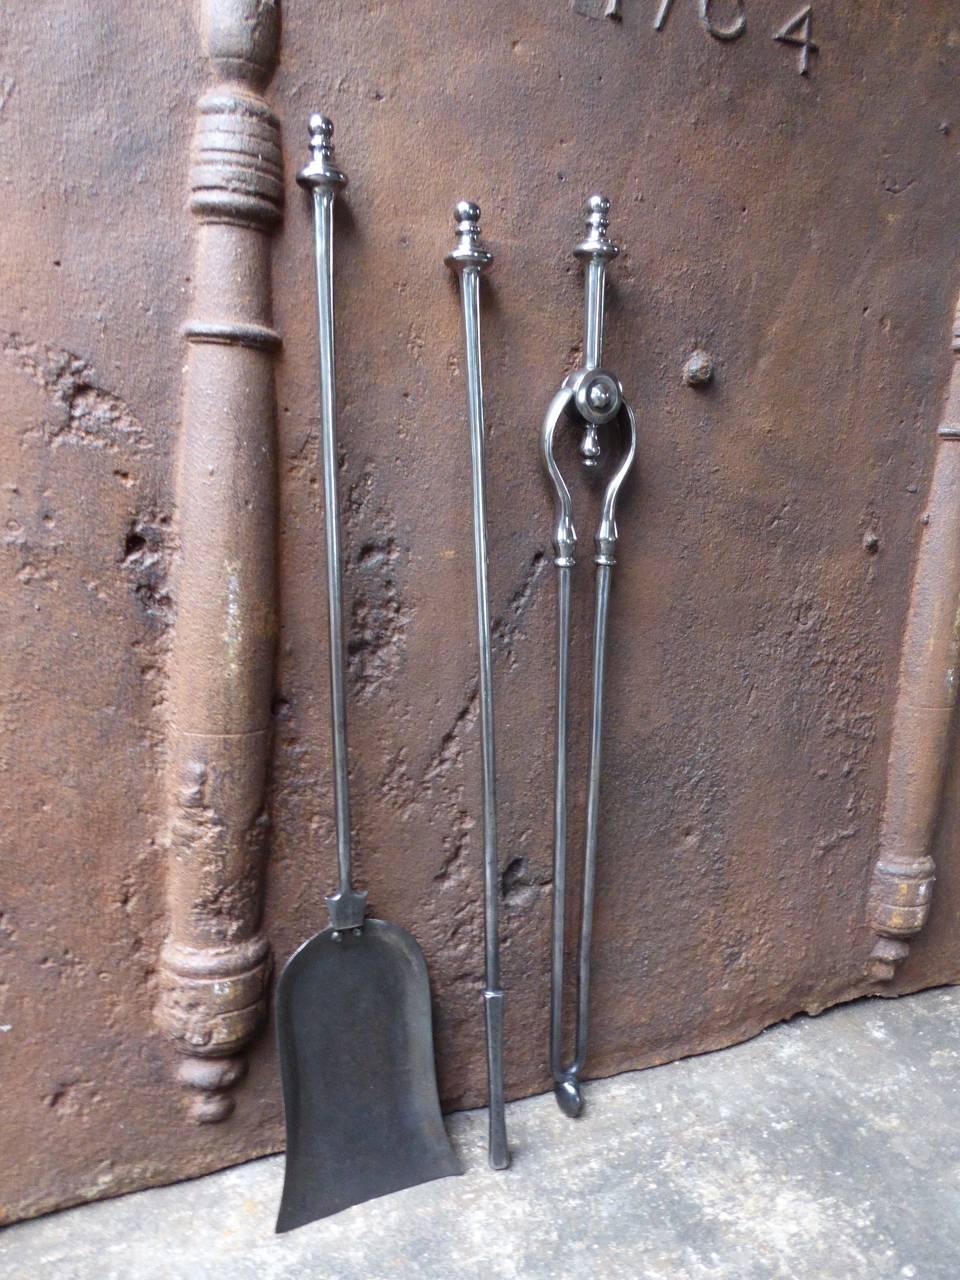 19th century English fireplace tool set fire irons made of polished steel.

We have a unique and specialized collection of antique and used fireplace accessories consisting of more than 1000 listings at 1stdibs. Amongst others, we always have 300+